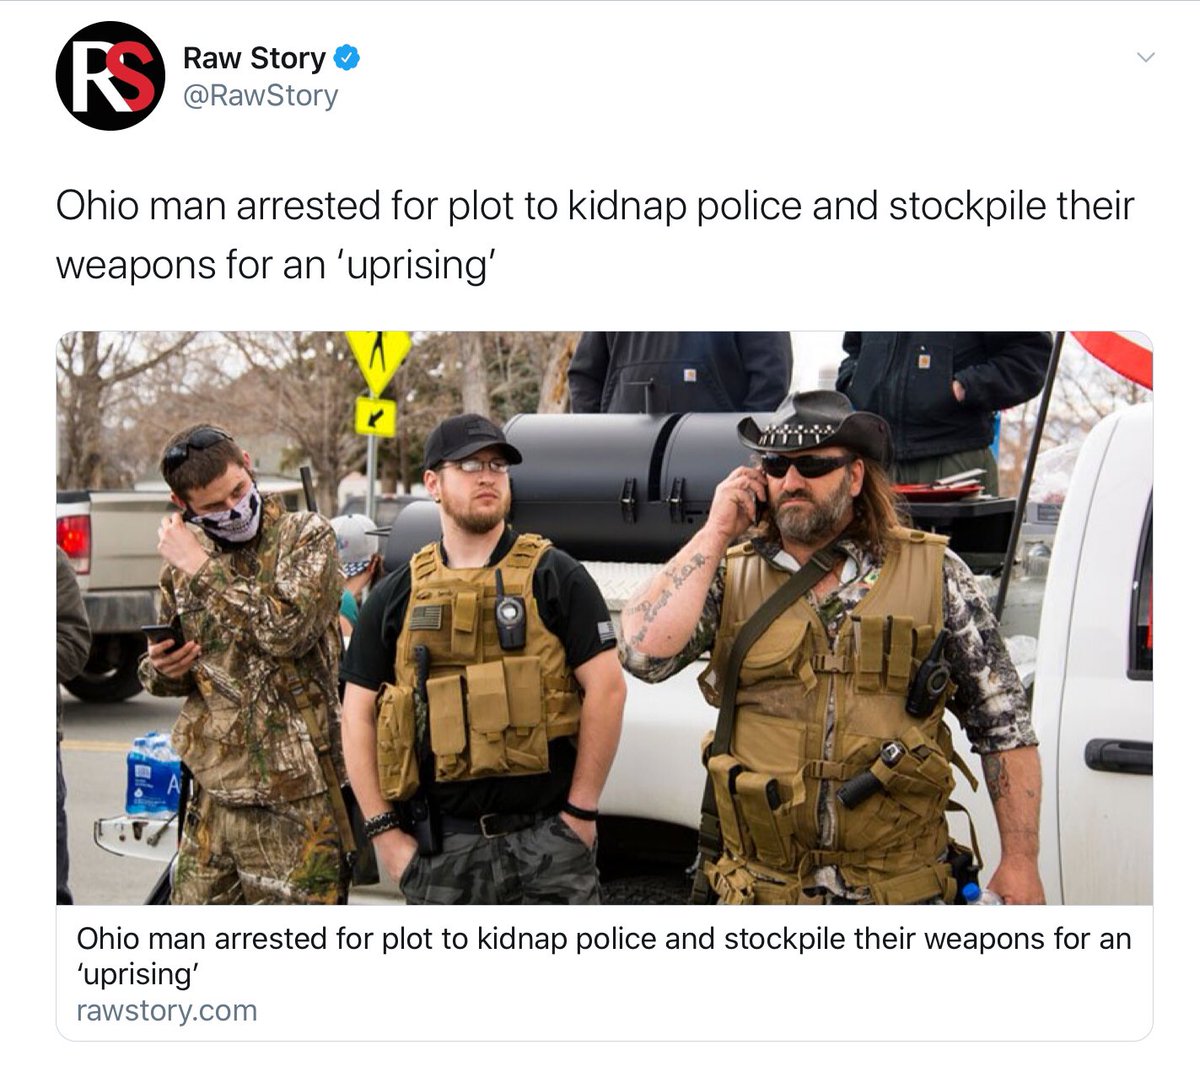 Left wing media outlets used an image of white males open carrying to tie them to a story of a planned terrorist attack.If you're in this picture, let me know. I'll get you in contact with counsel to sue  @RawStory